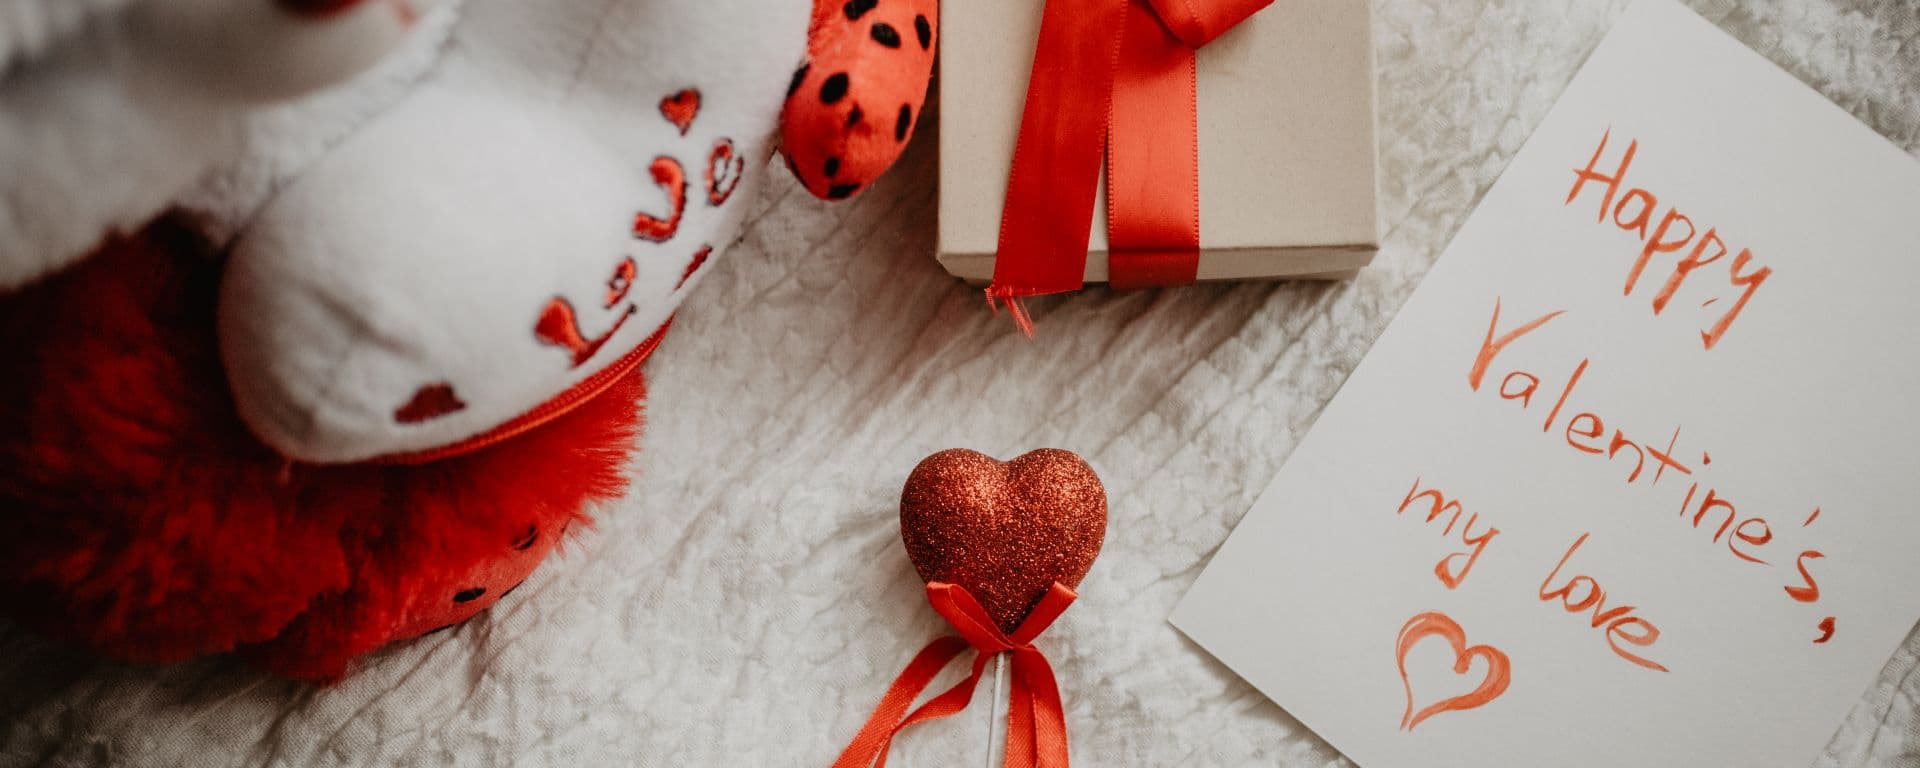 The Perfect Valentine’s Day Gifts Your Loved One Will Adore